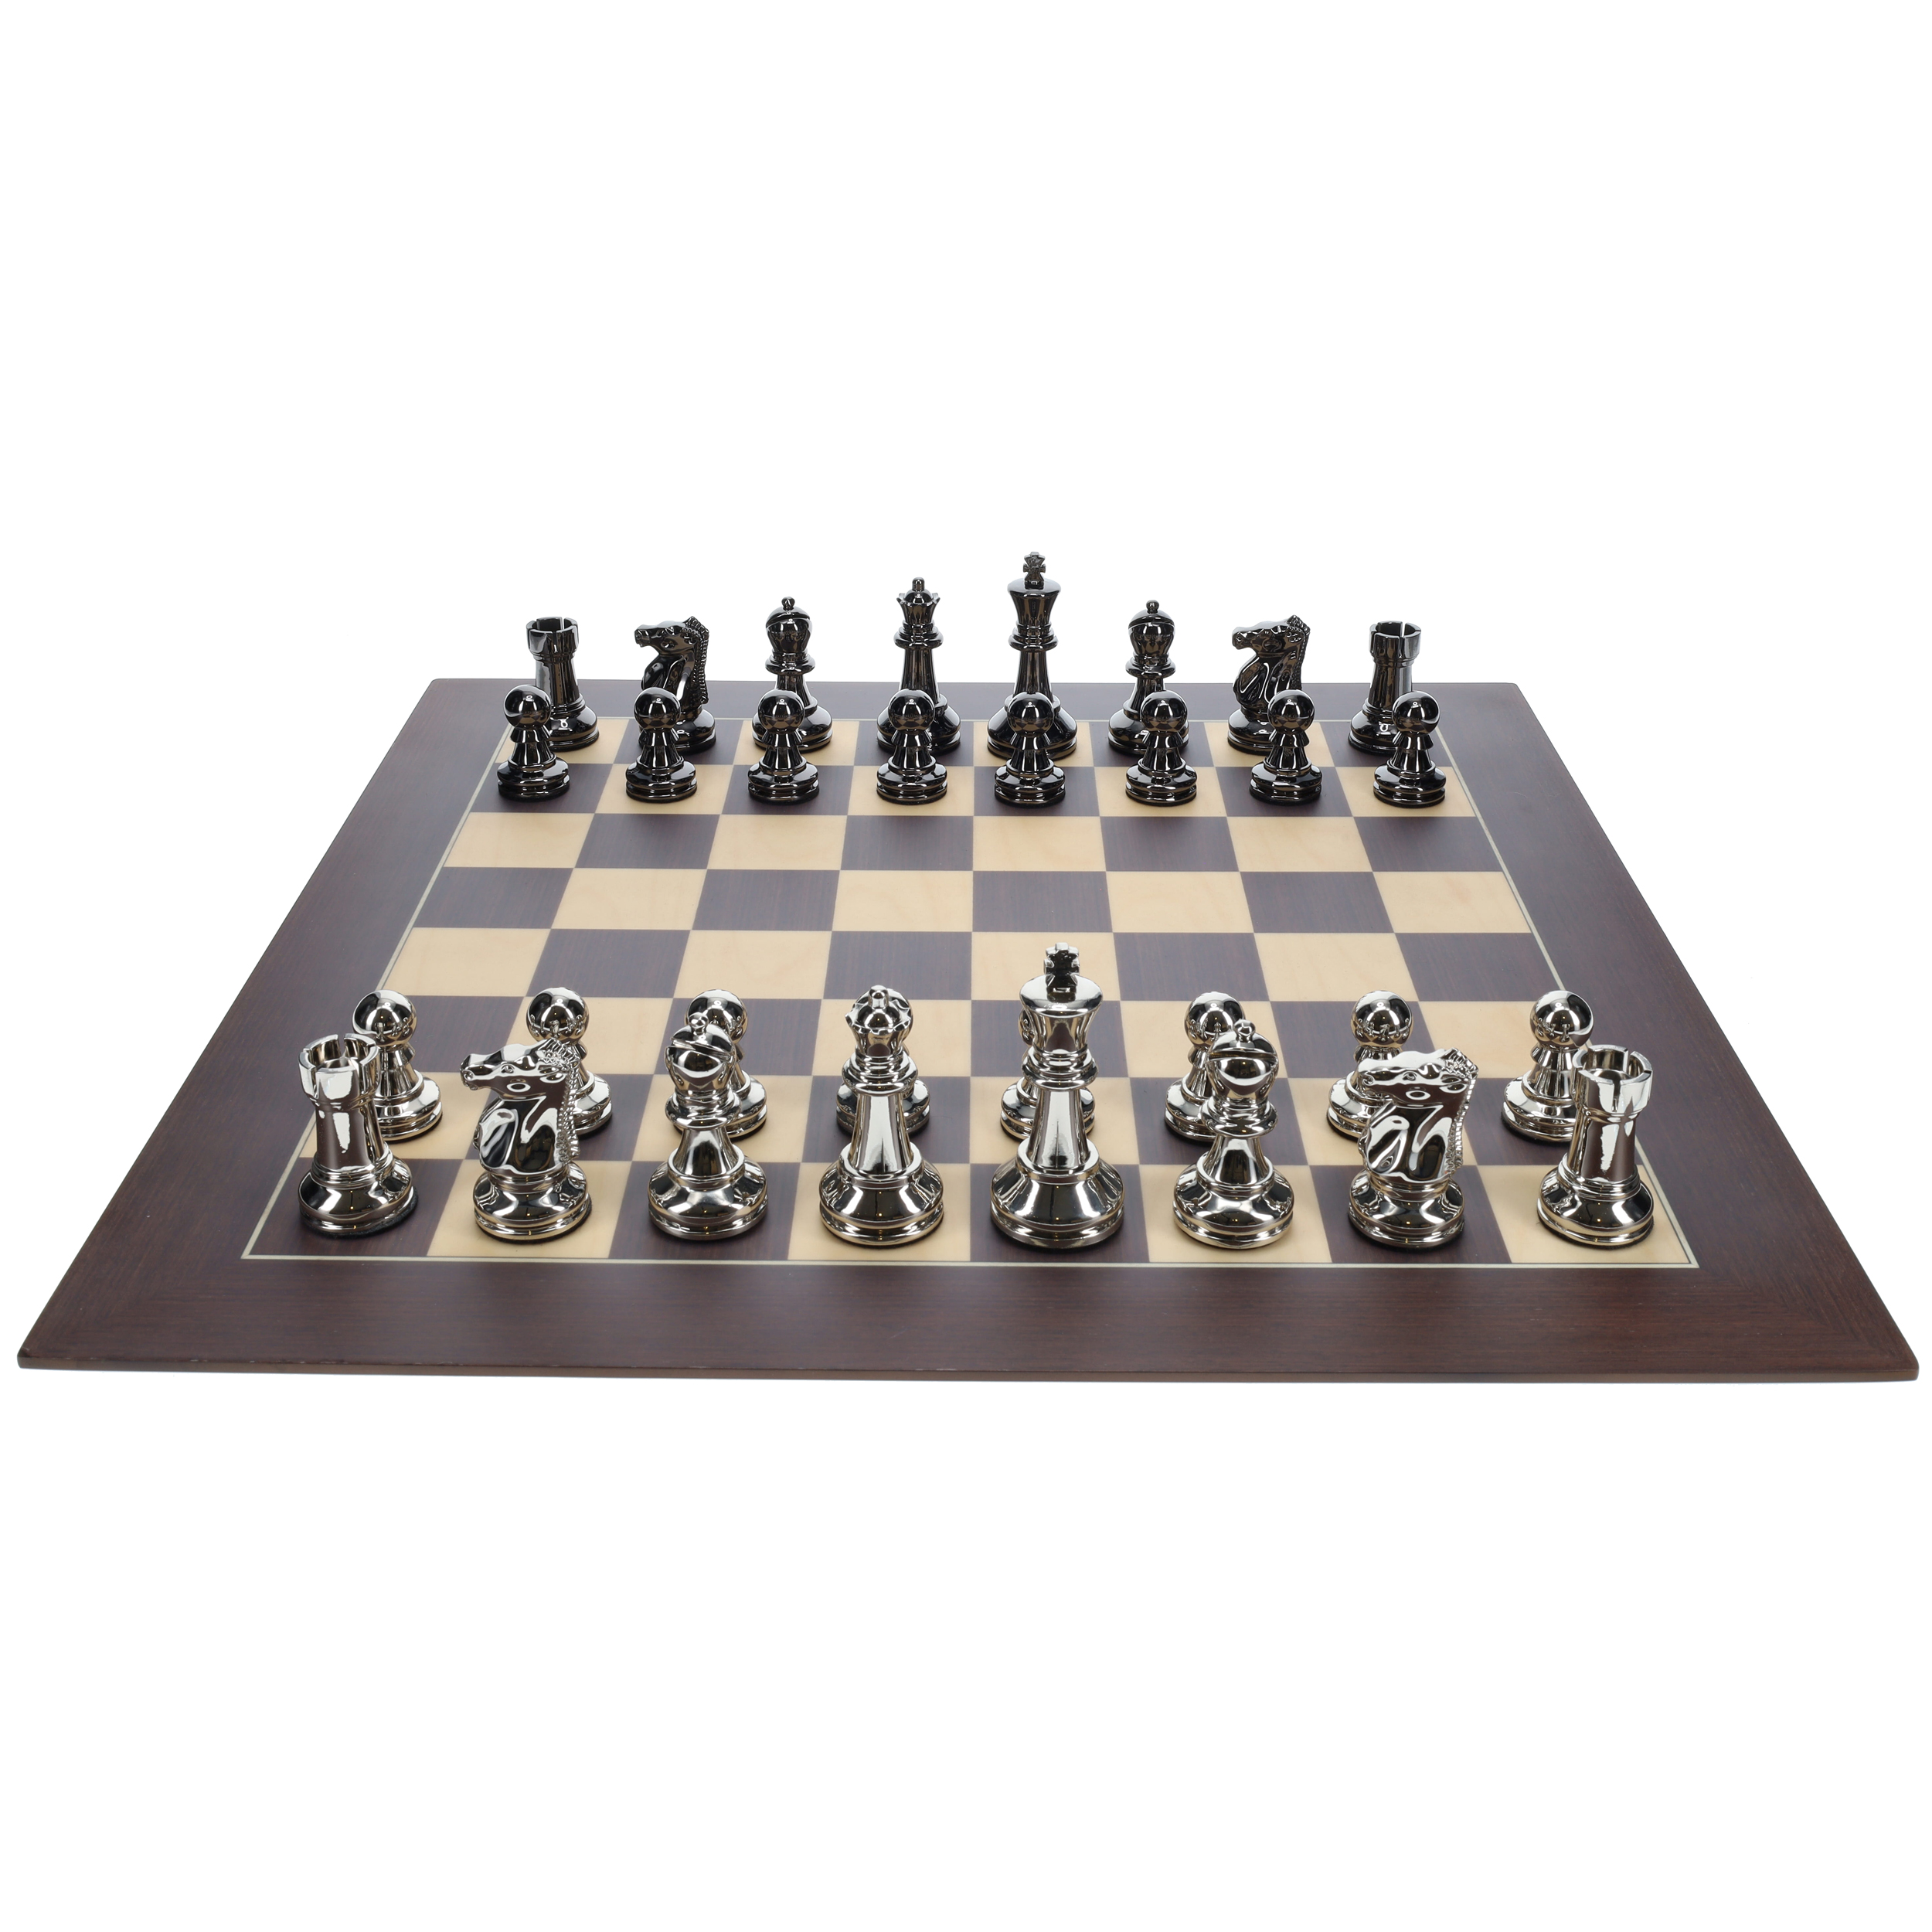 https://woodexpressions.com/wp-content/uploads/2023/05/124021-ultimate-metal-chess-set-straight-2500.jpg